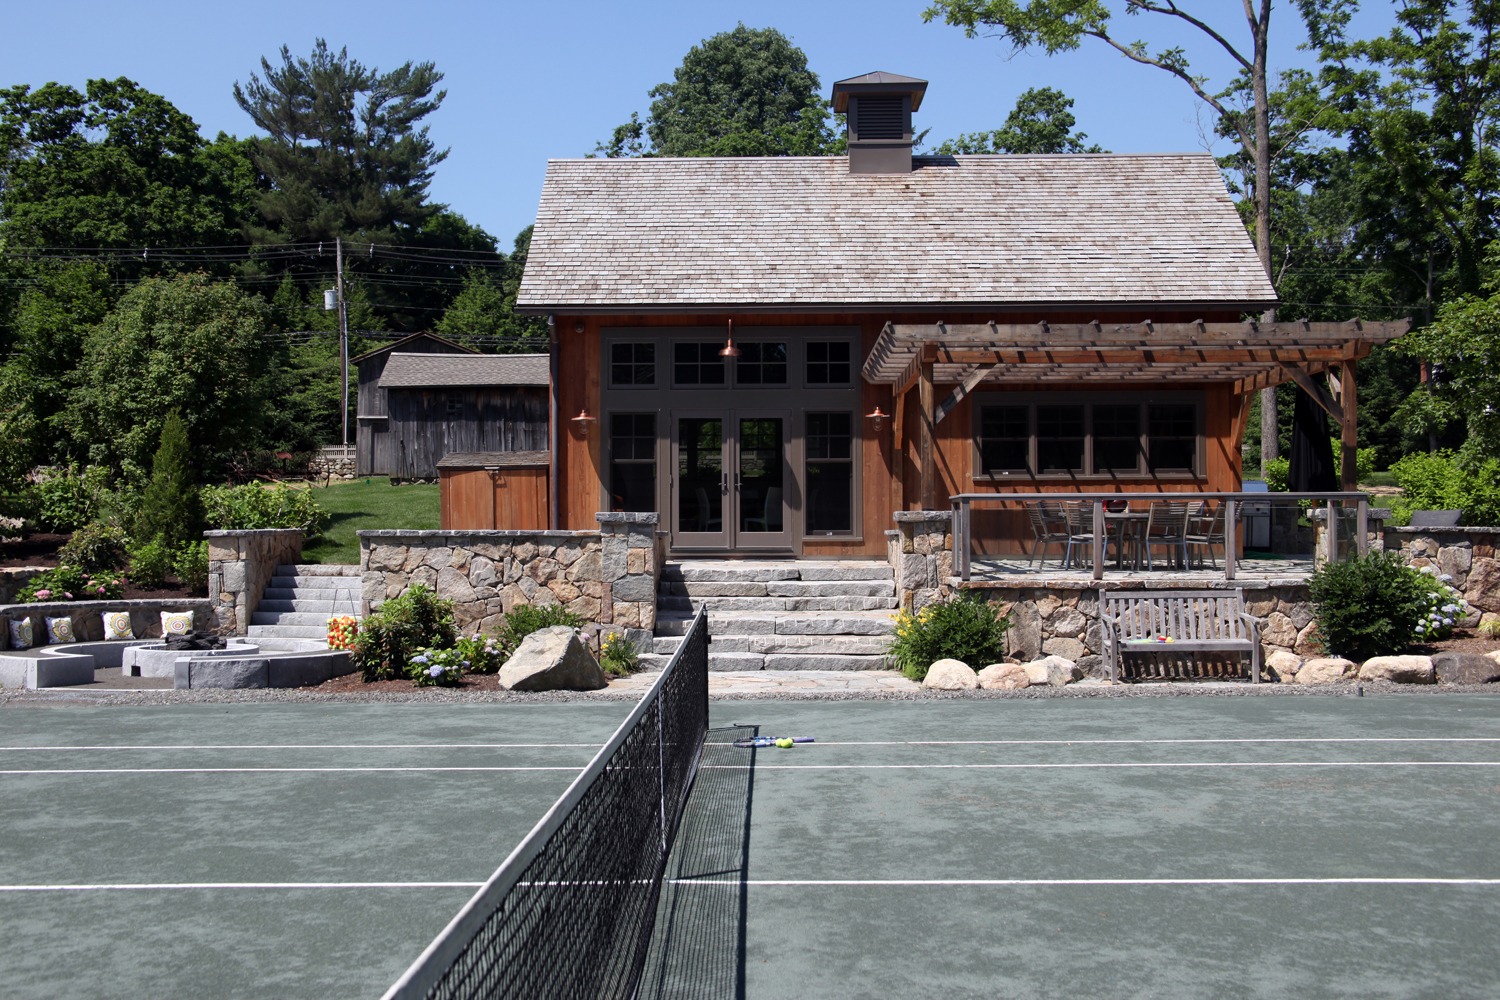 A tennis court with a wooden pavilion house, stone steps, benches, lush greenery, and a clear blue sky. Rackets rest on the ground near the net.